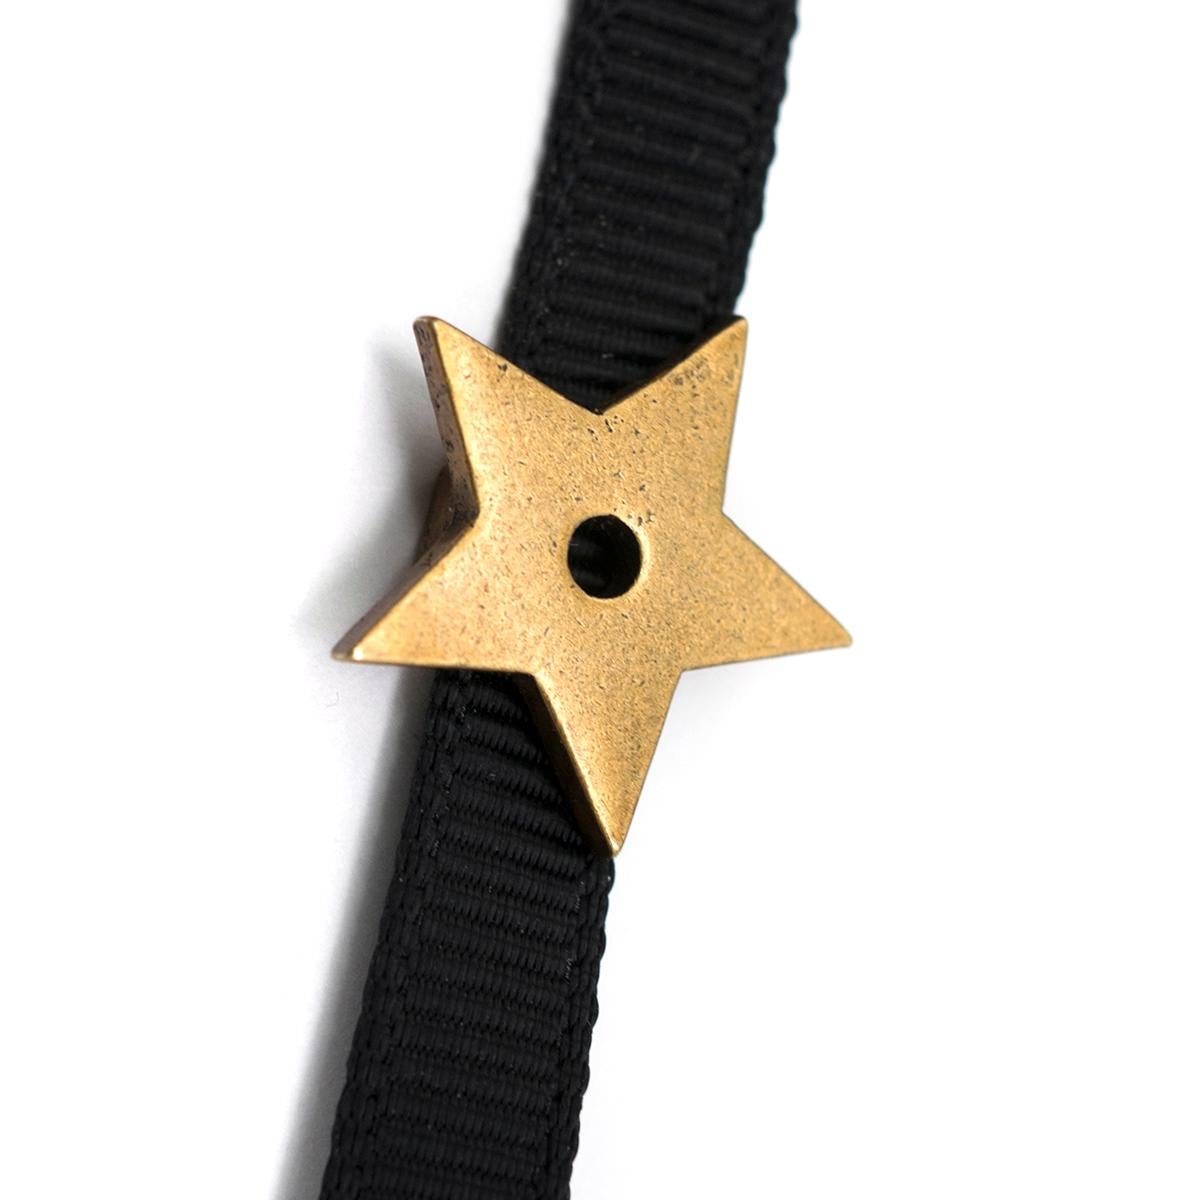 Christian Dior D'Porte-Bonheur Star Choker Necklace 

- Star Choker Necklace
- Gold-toned star pendant
- Black fabric ribbon cord
- Lobster clasp closure at back, adjustable length

Please note, these items are pre-owned and may show some signs of